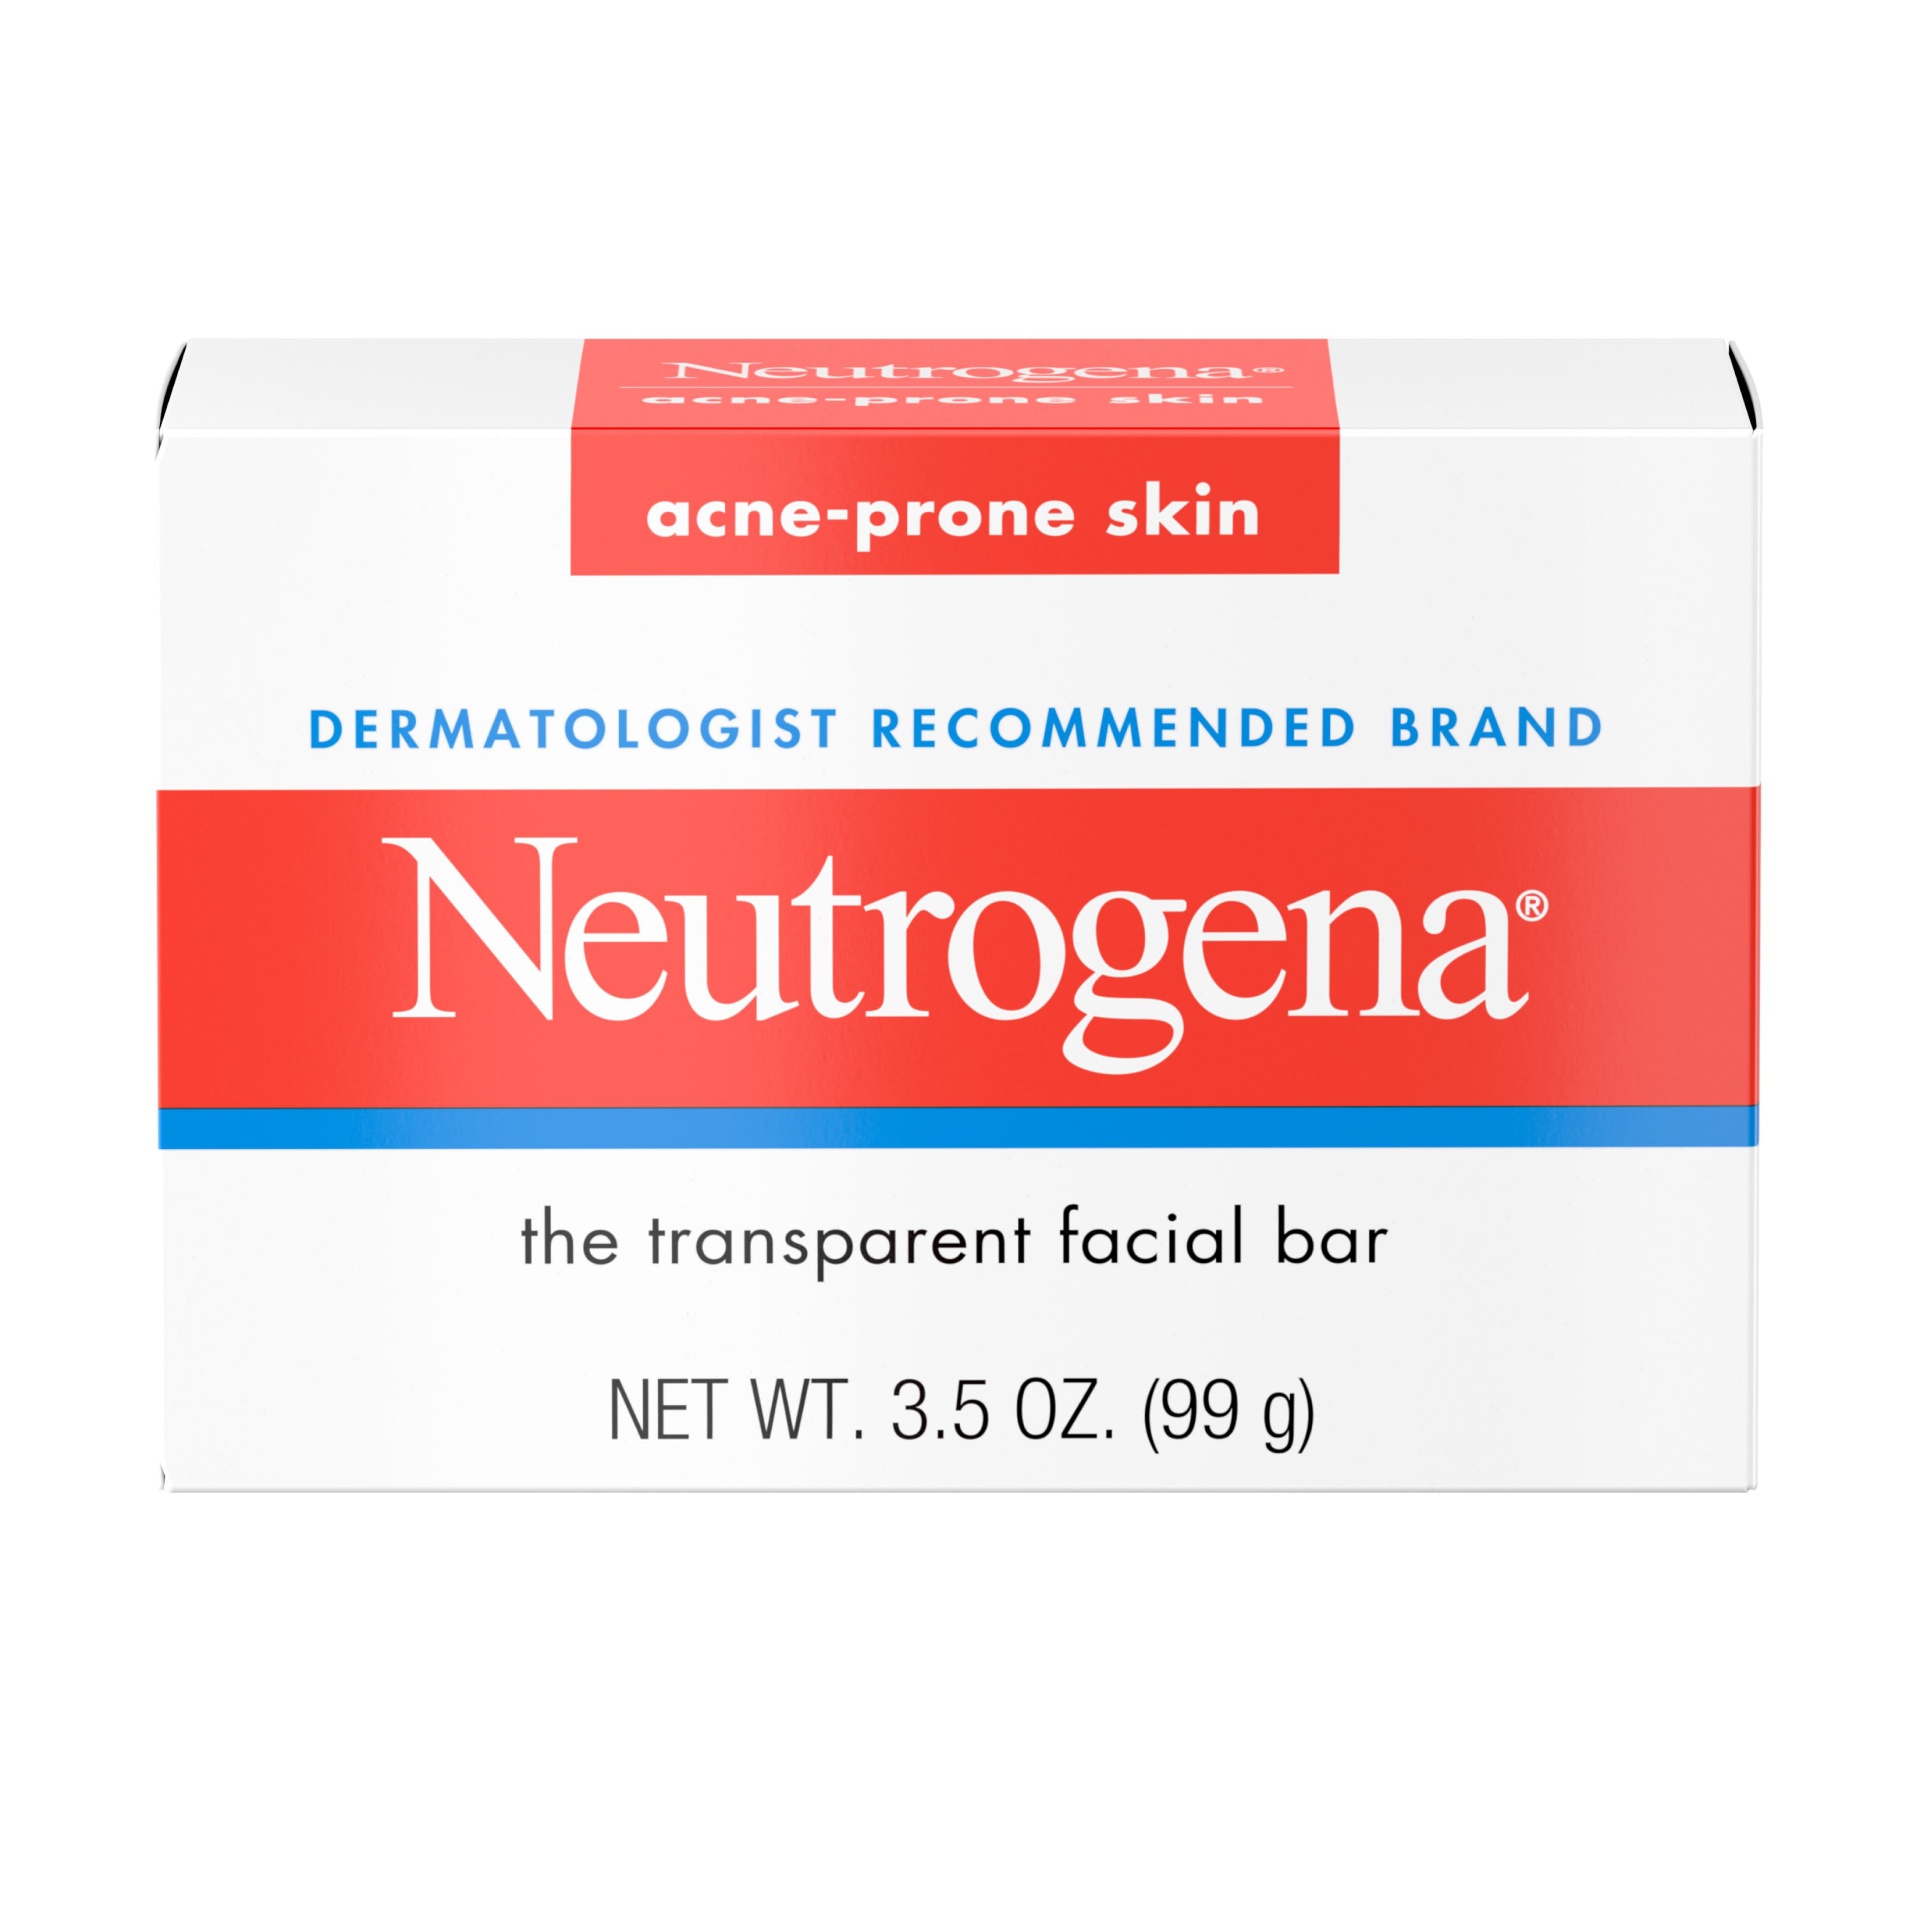 slide 1 of 1, Neutrogena Facial Cleansing Bar Treatment for Acne-Prone Skin, Non-Medicated & Glycerin-Rich Formula Gently Cleanses without Over-Drying, No Detergents or Dyes, Non-Comedogenic, 3.5 oz, 3.5 oz